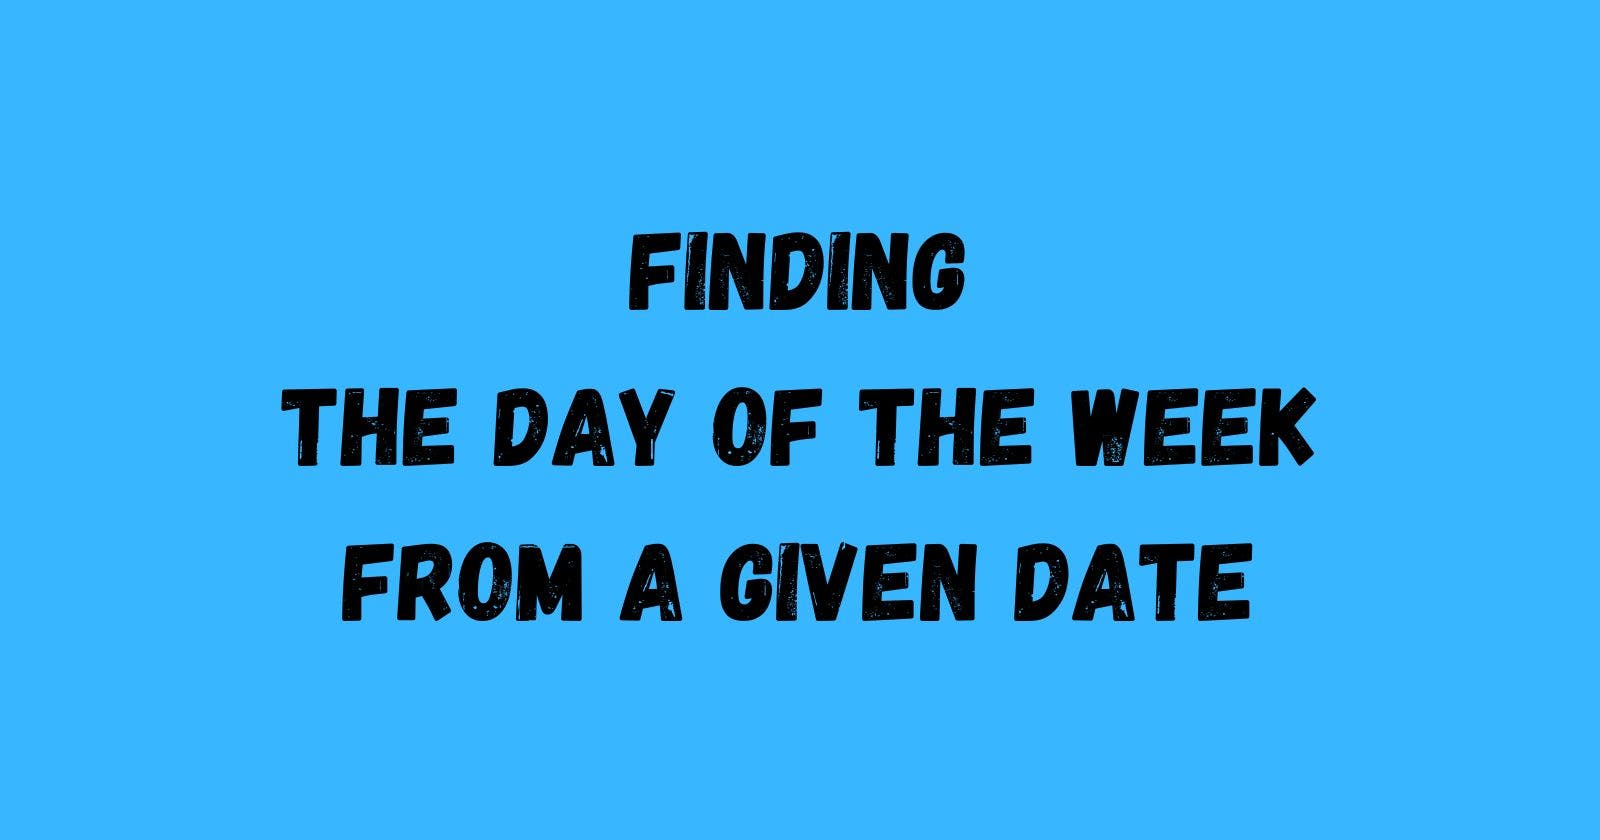 Getting the Day of a Date Using Python